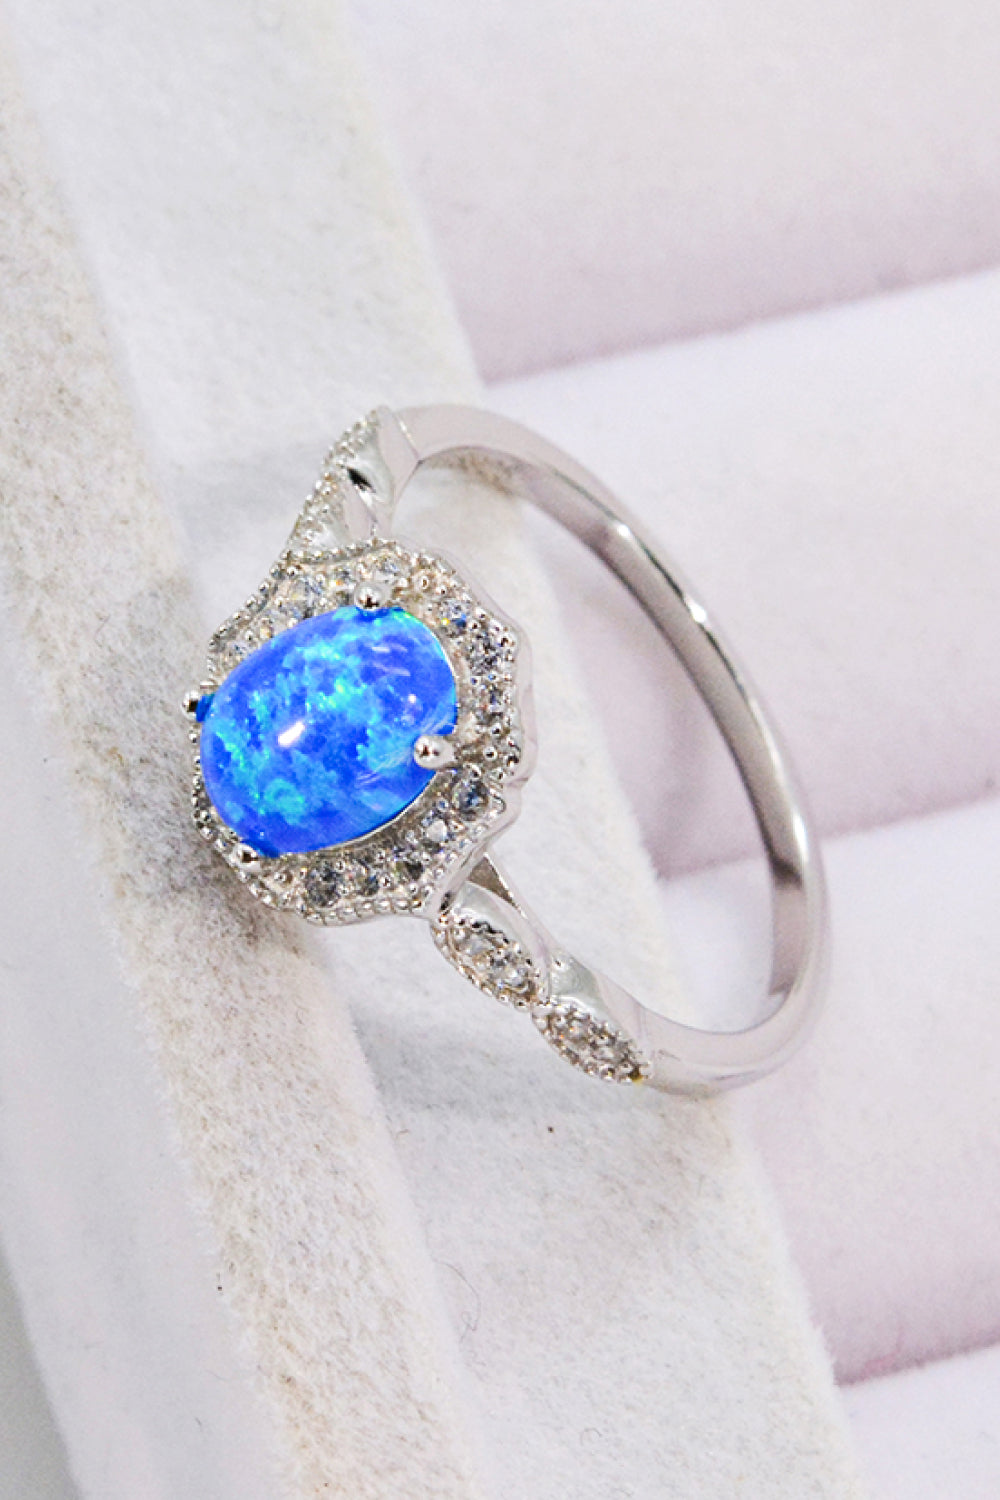 Opal and Zircon 925 Sterling Silver Ring - AllIn Computer